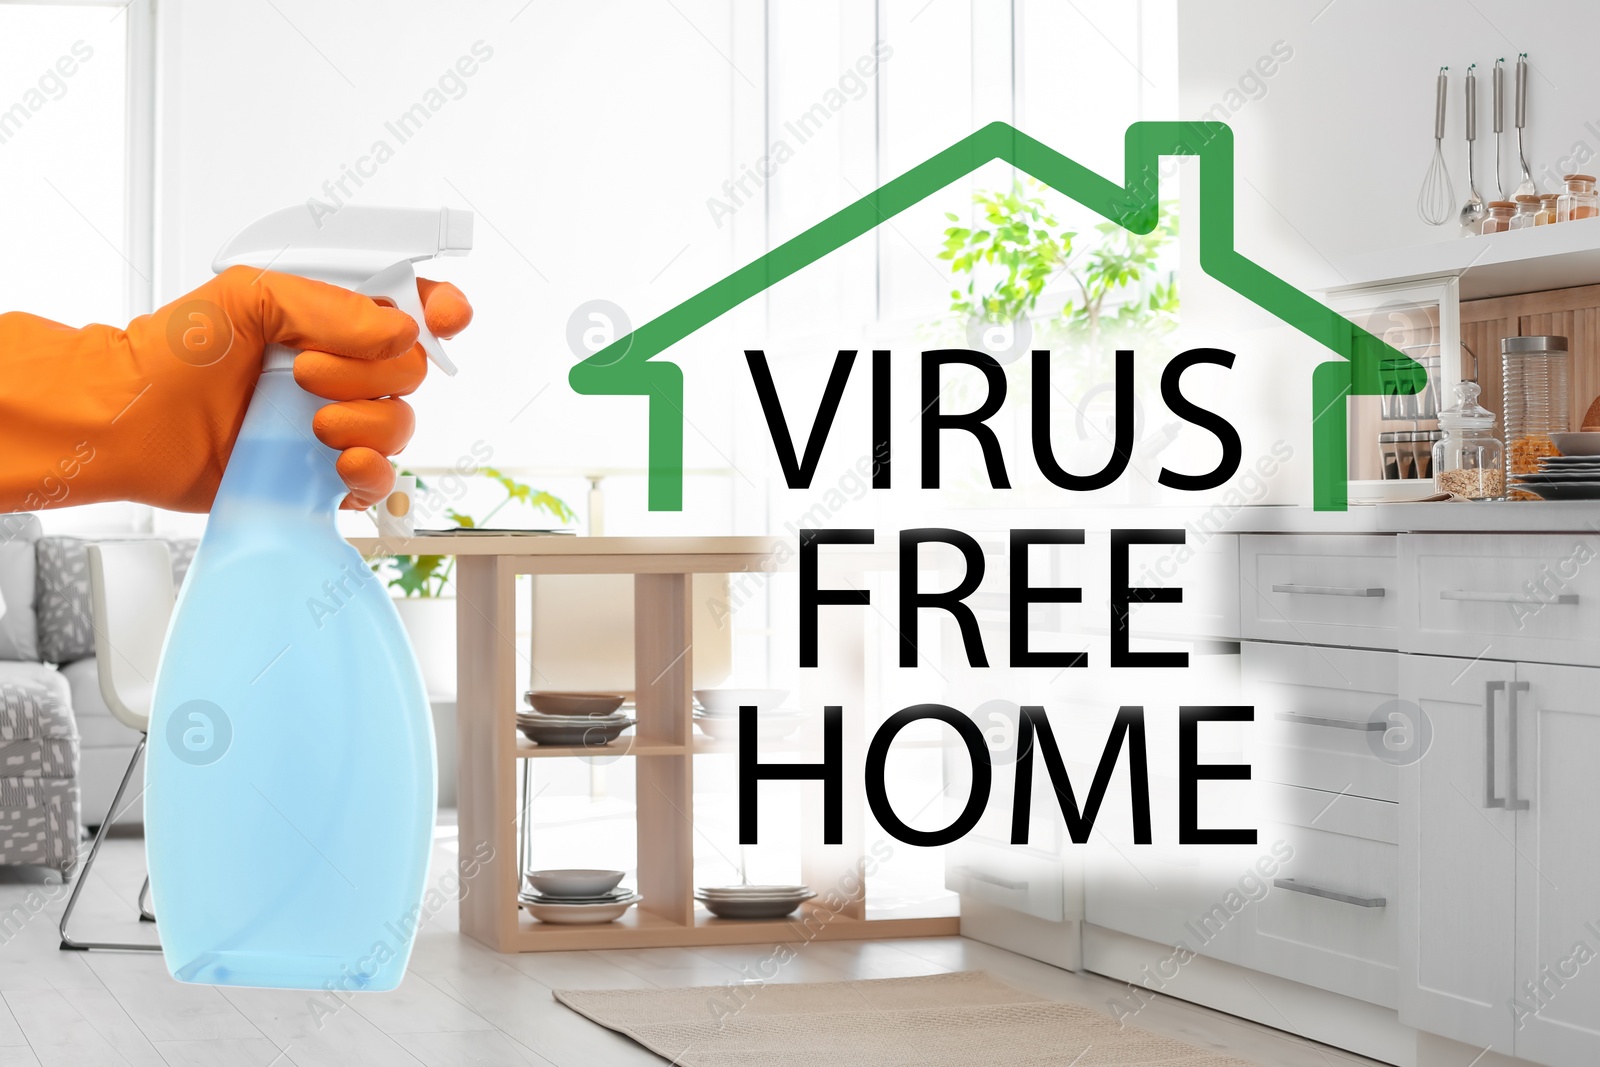 Image of Keep your home virus-free. Woman cleaning kitchen with disinfecting solution 